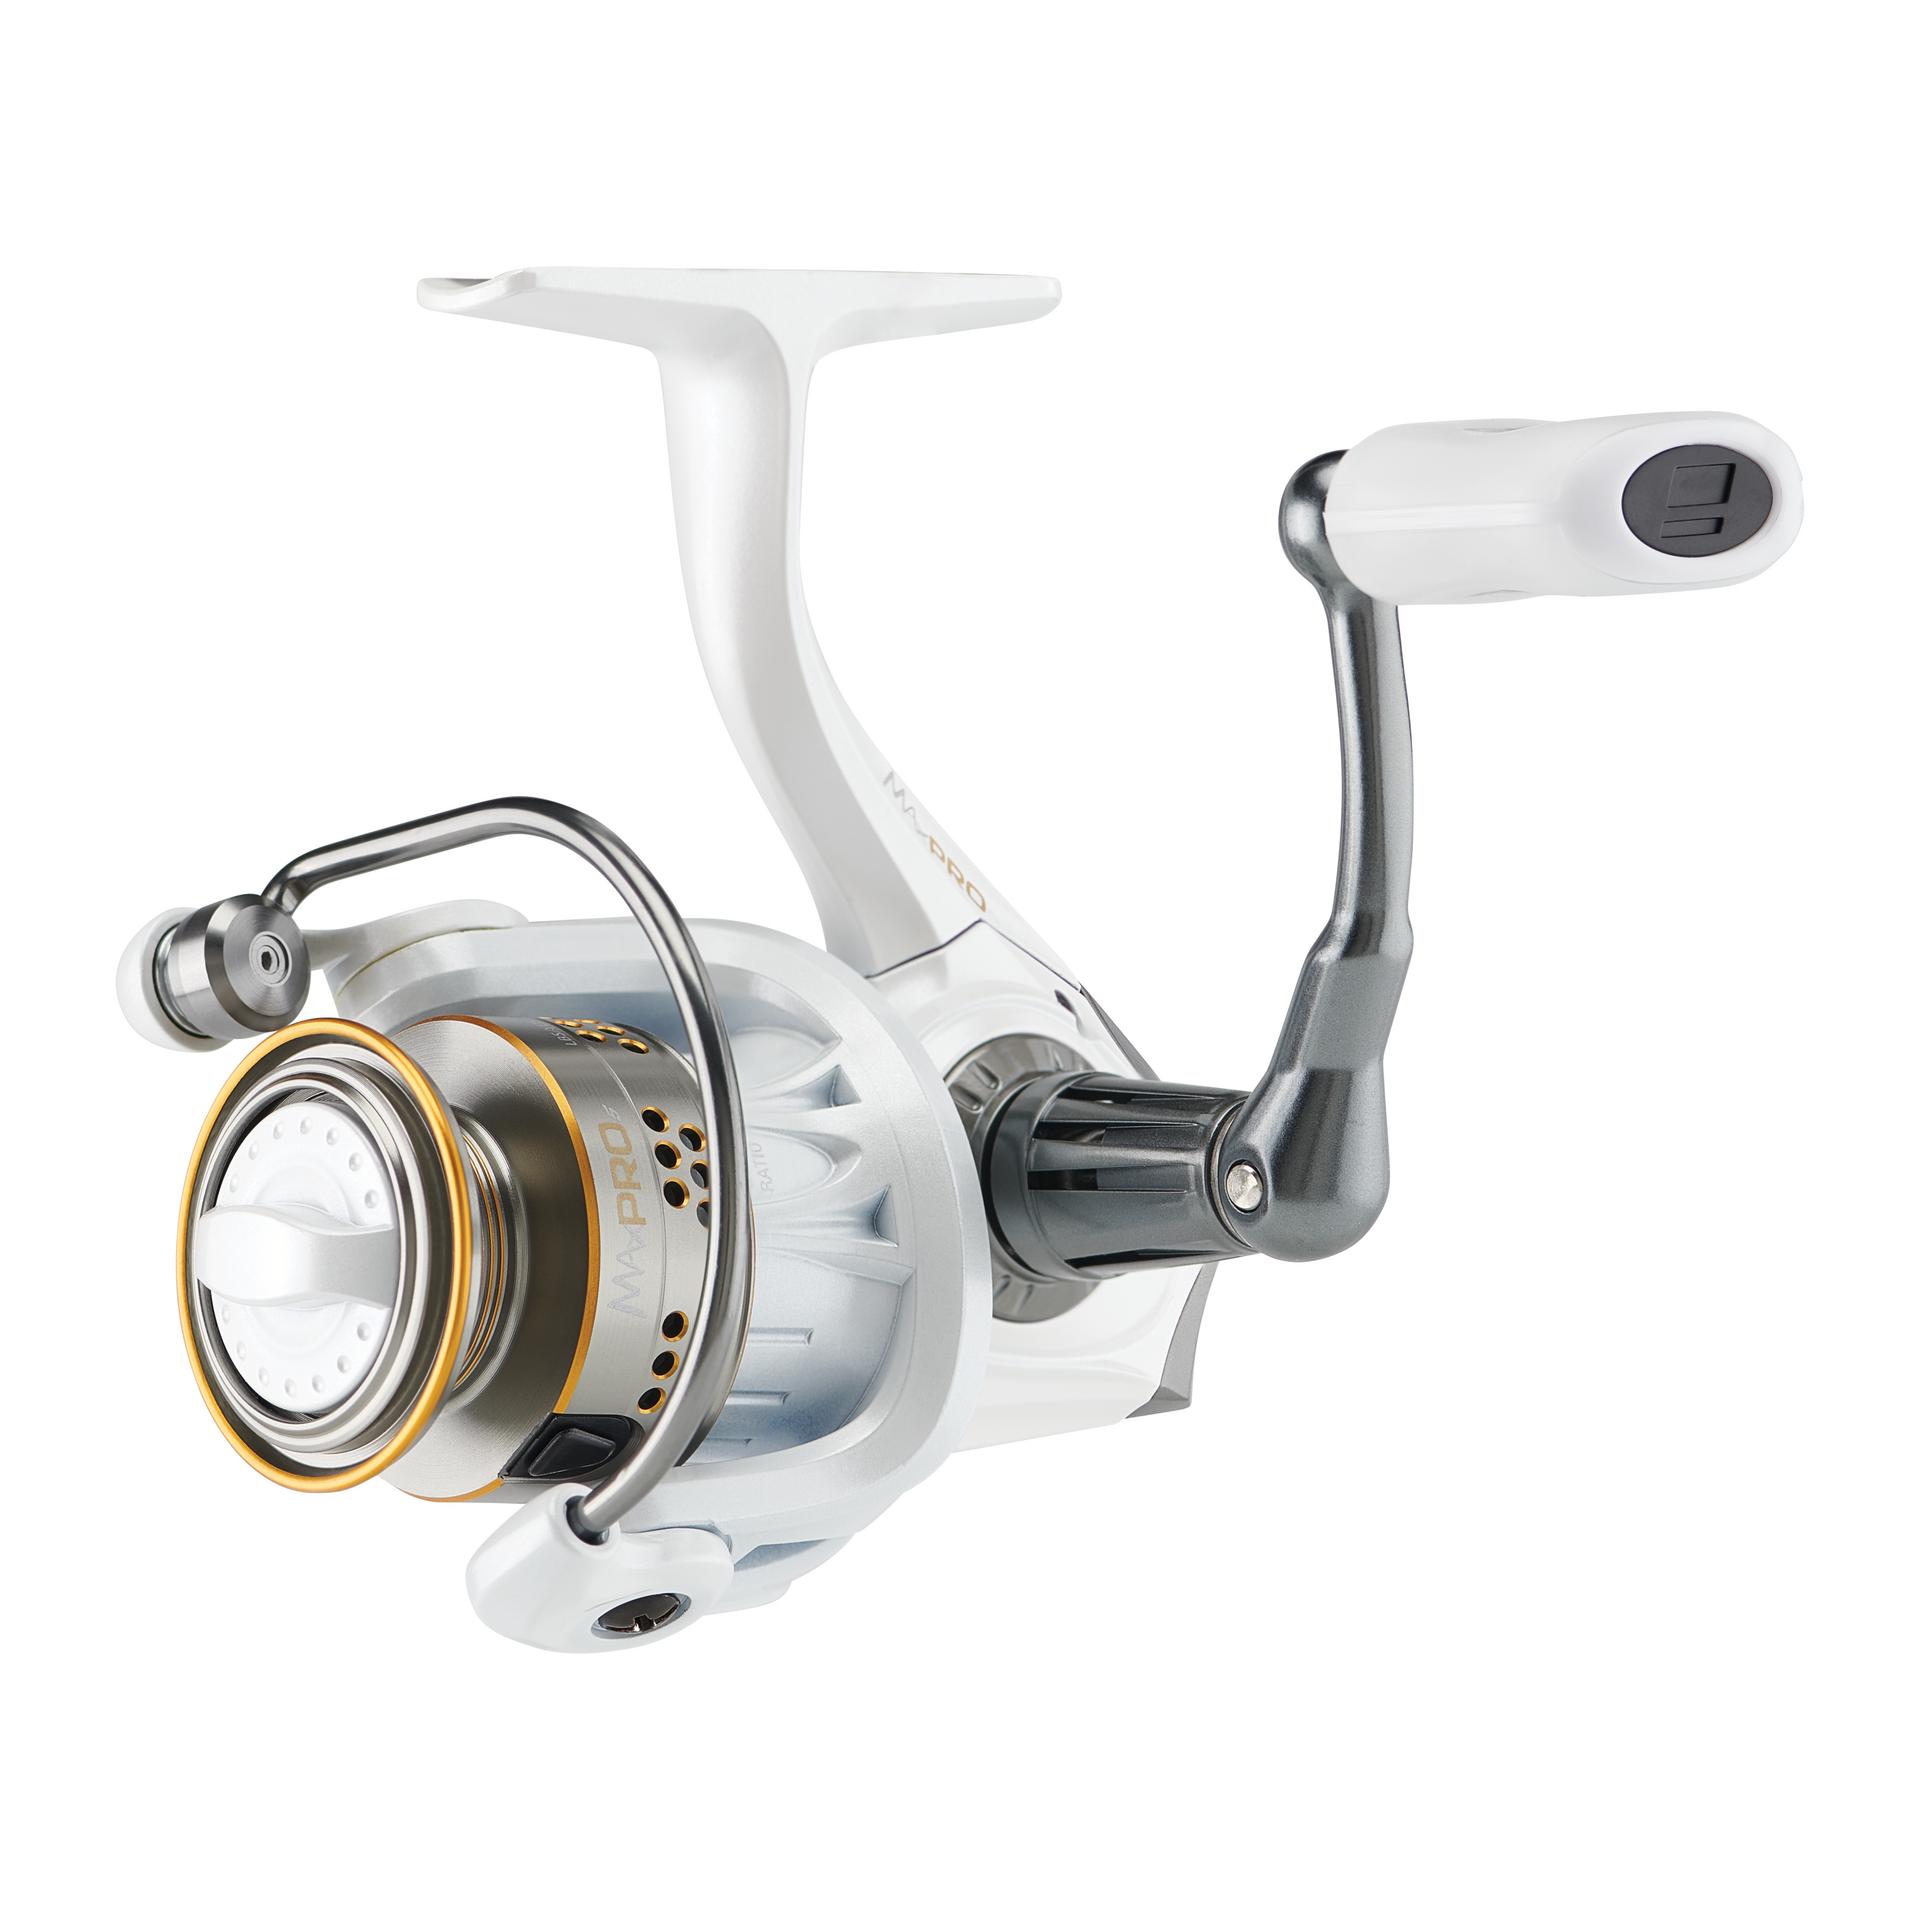 Abu Garcia Max Pro Low Profile Baitcast Reel, Size LP (1539730), 7  Stainless Steel Ball Bearings + 1 Roller Bearing, Synthetic Star Drag, Max  of 15lb